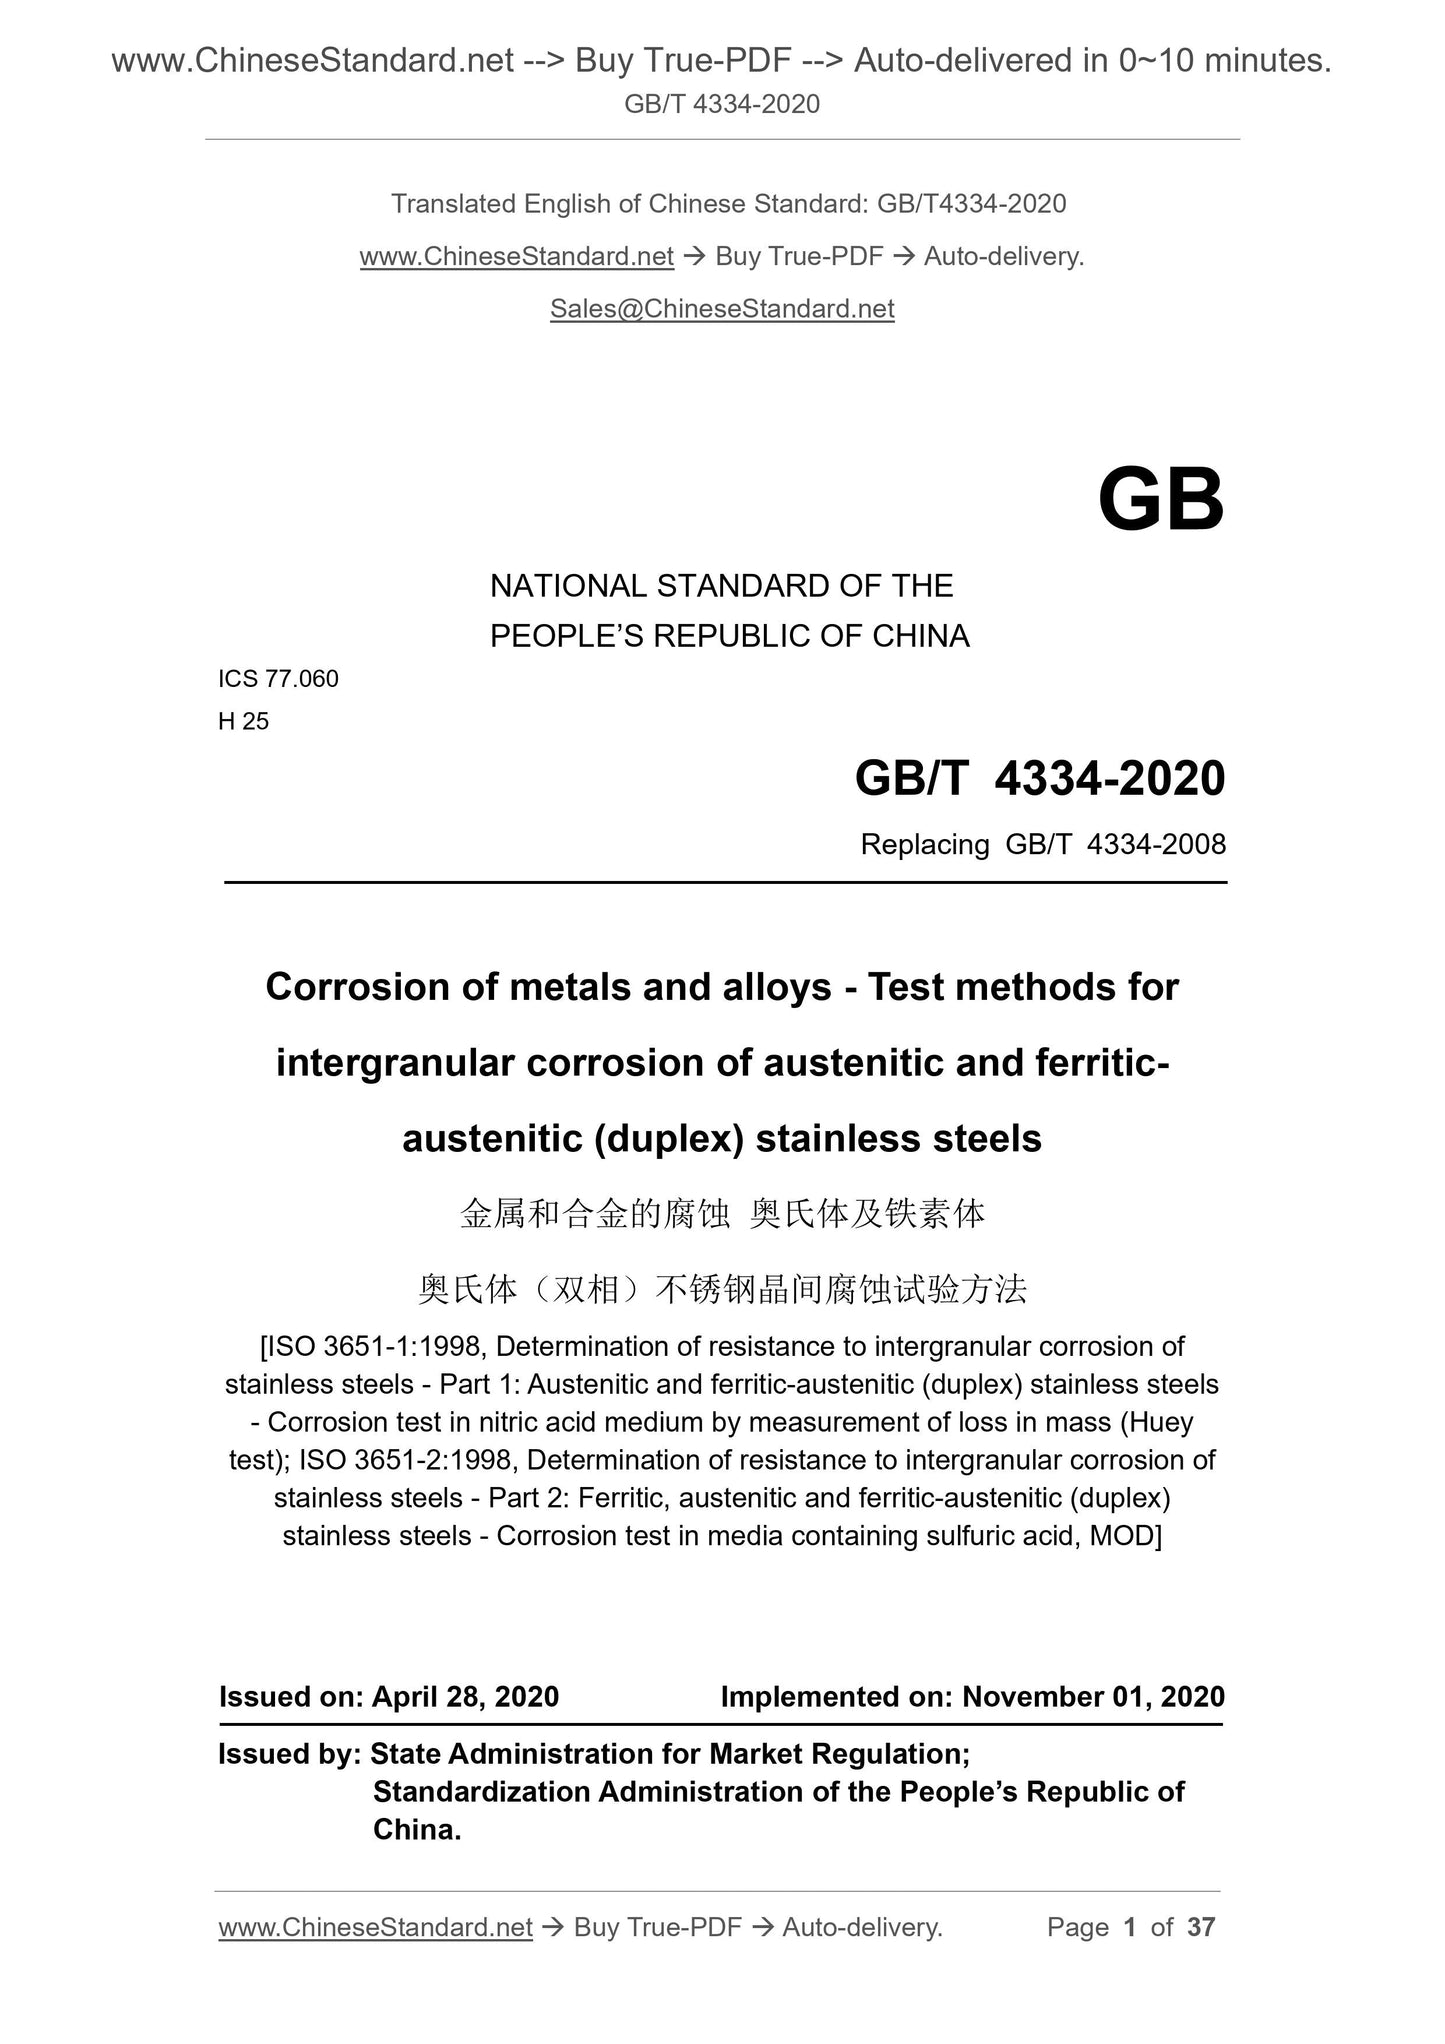 GB/T 4334-2020 Page 1